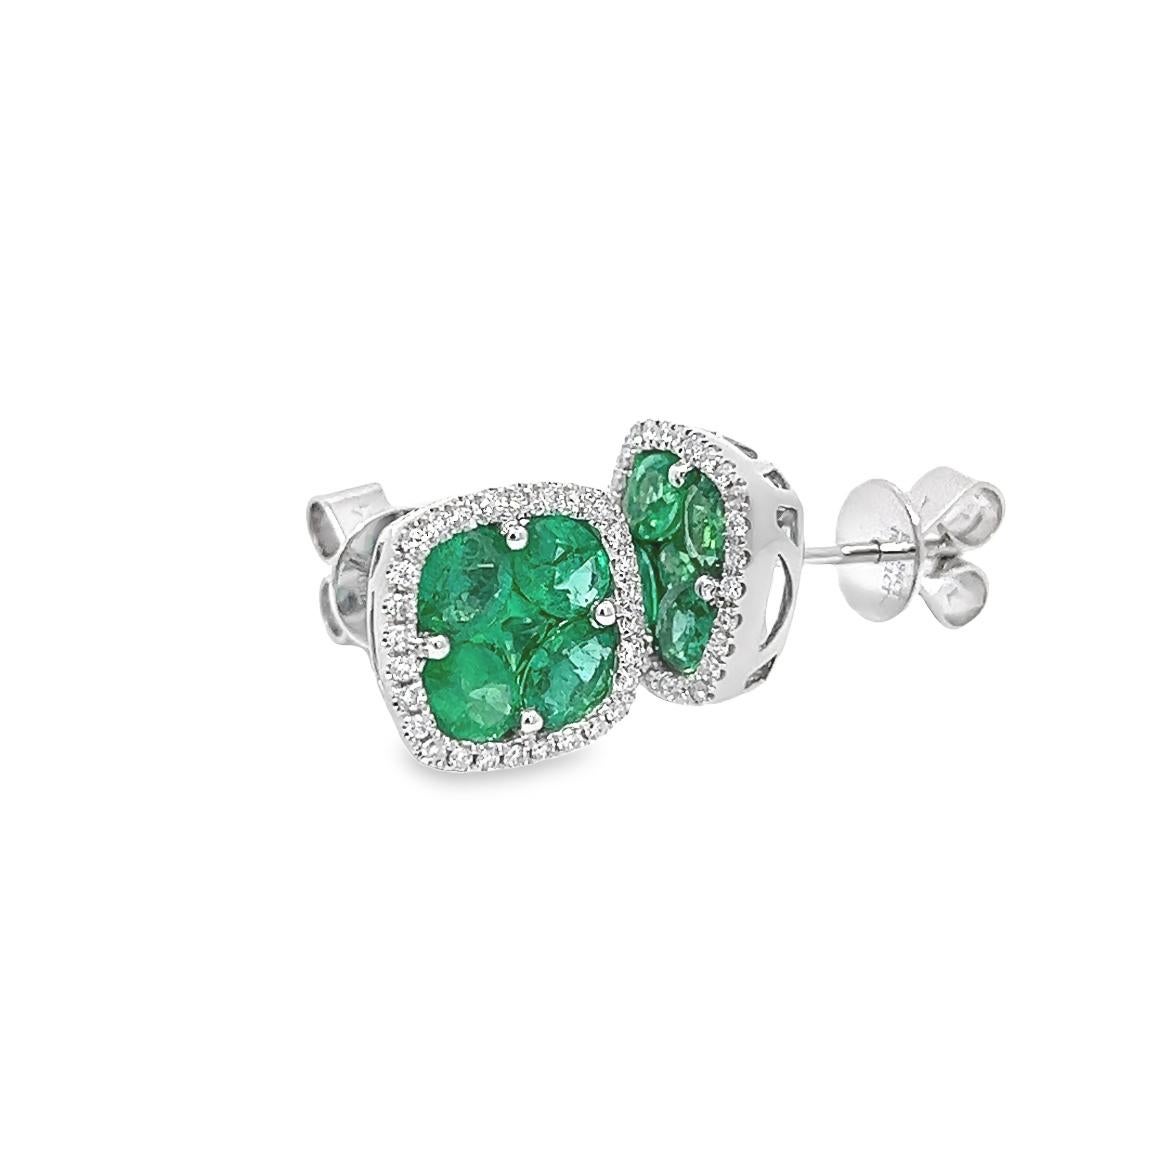 This beautiful pair of earrings are made of Natural Emeralds and a Good Quality of  Earthborn Diamonds summarizing the Emeralds beauty, set in polished 18K White Gold setting making this pieces an excellent accessory that can be used in a any